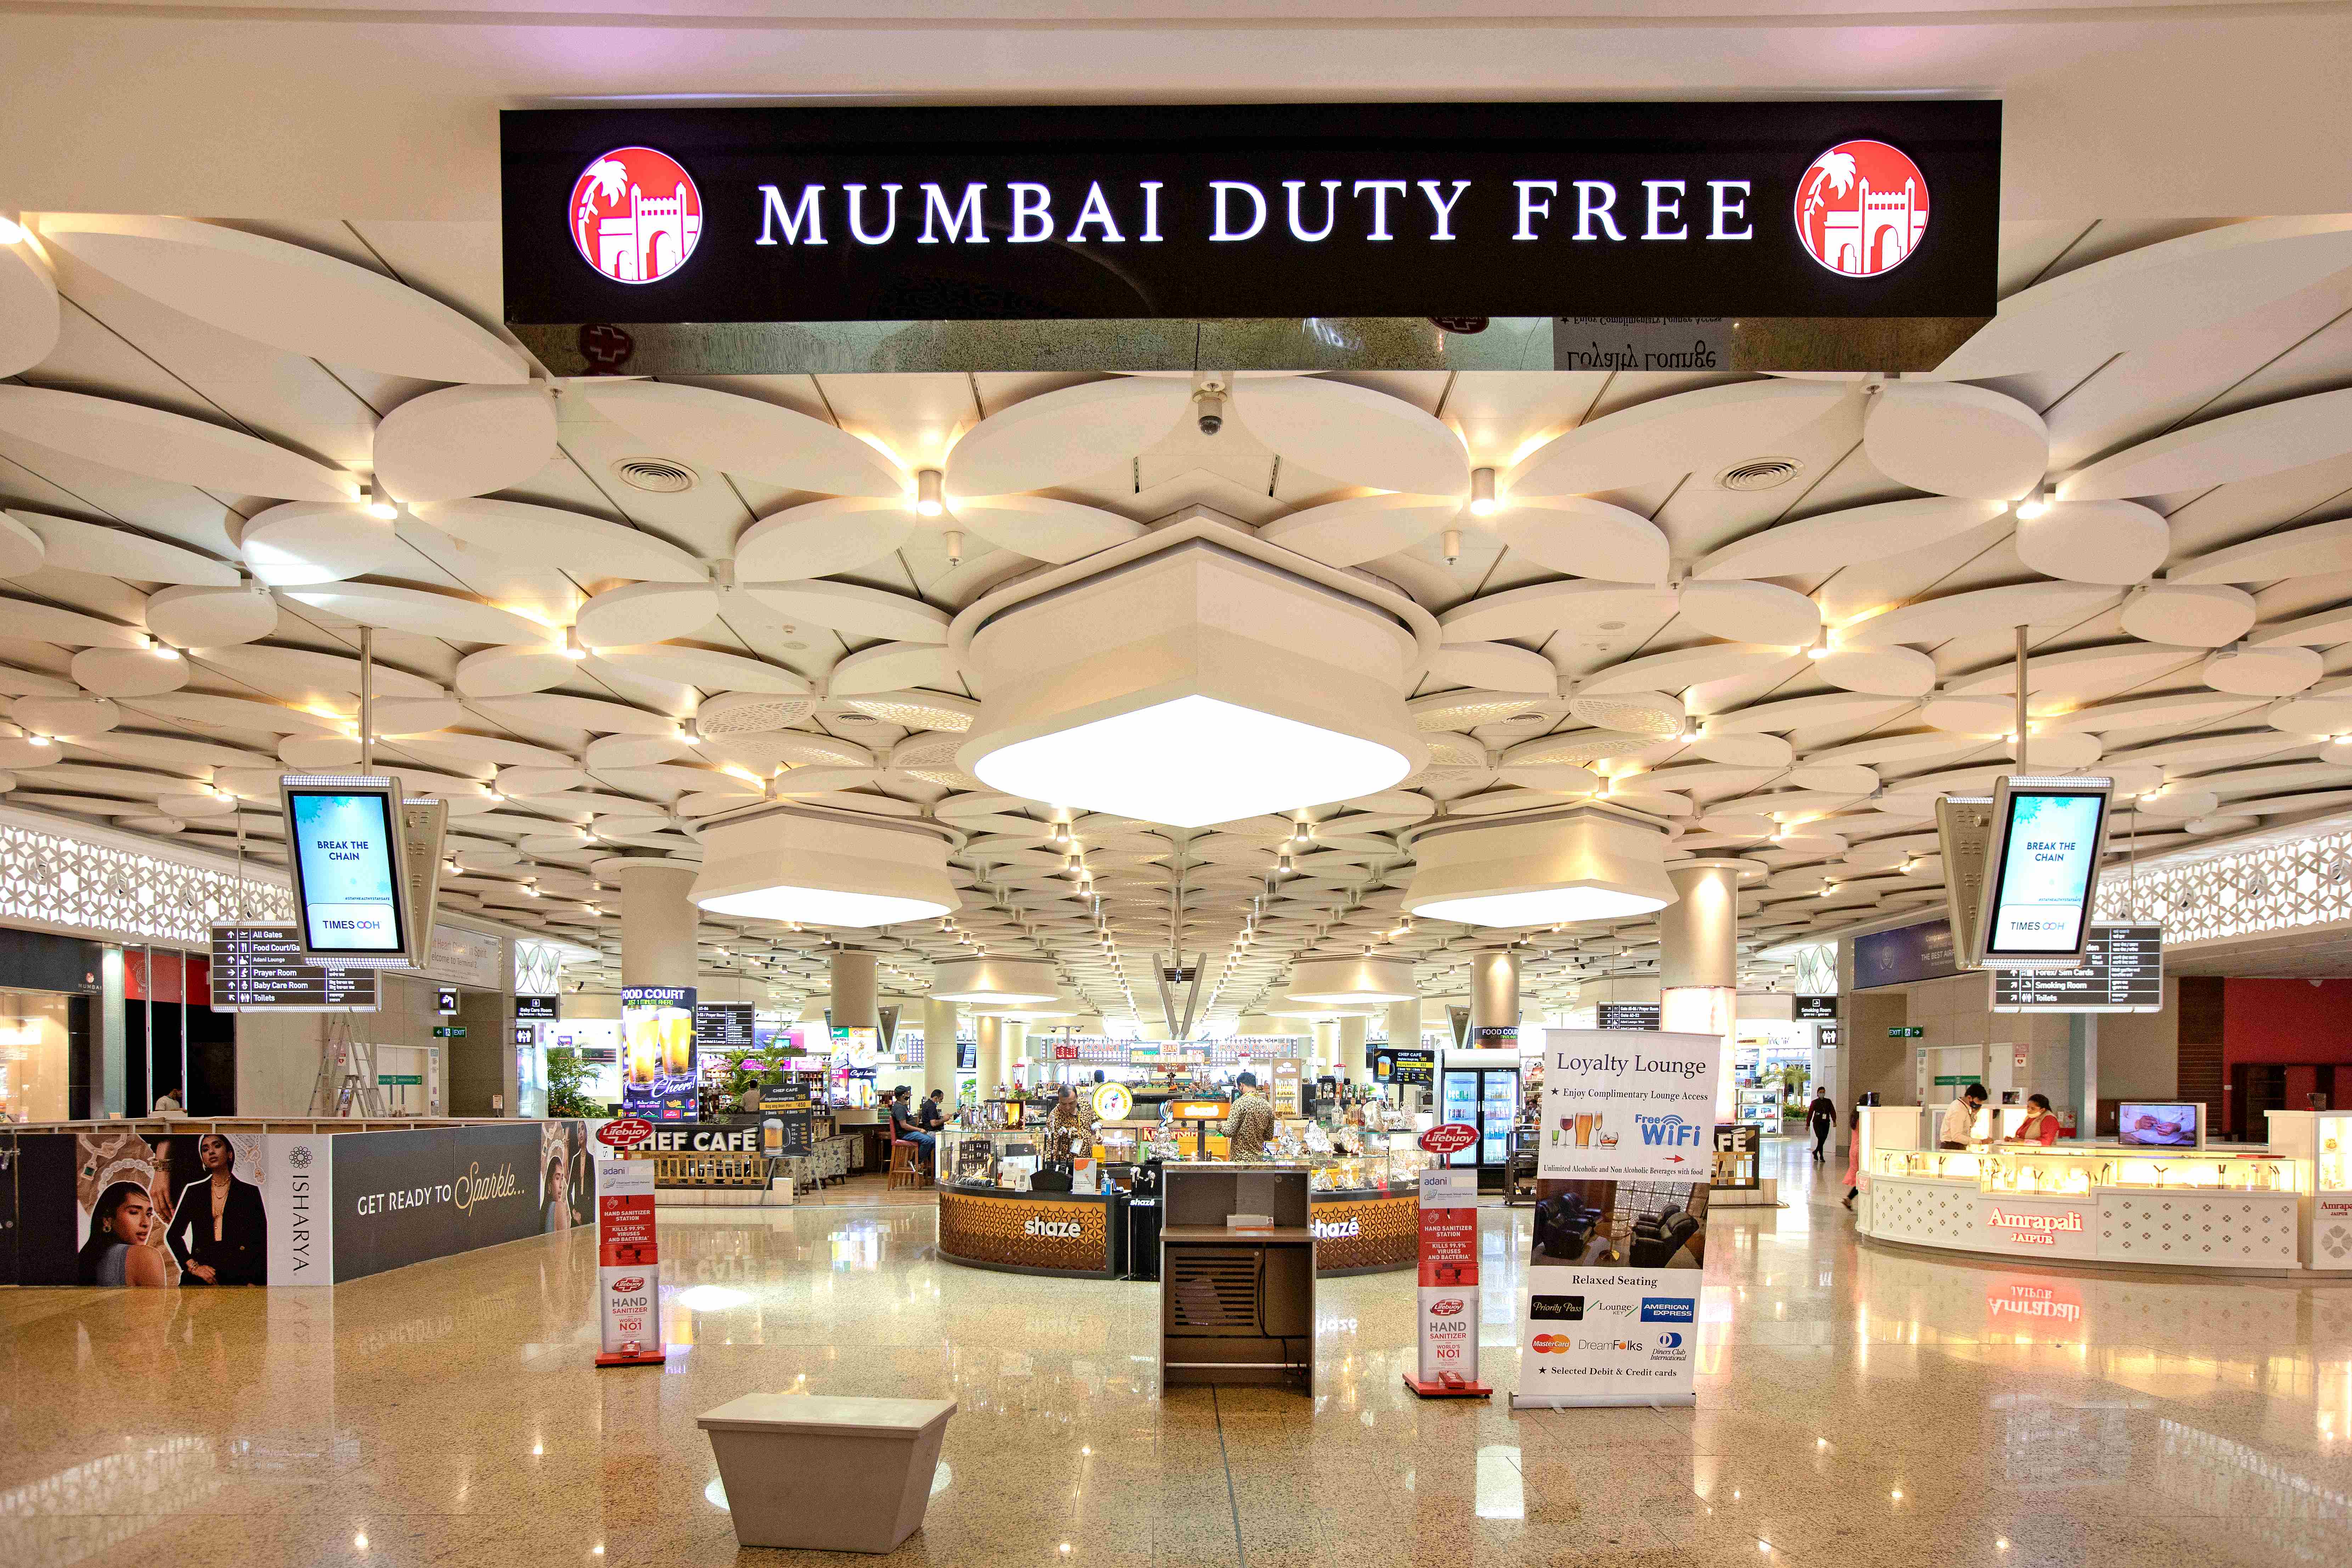 Mumbai Duty Free welcomes passengers to the ‘Shop & Win’ festival